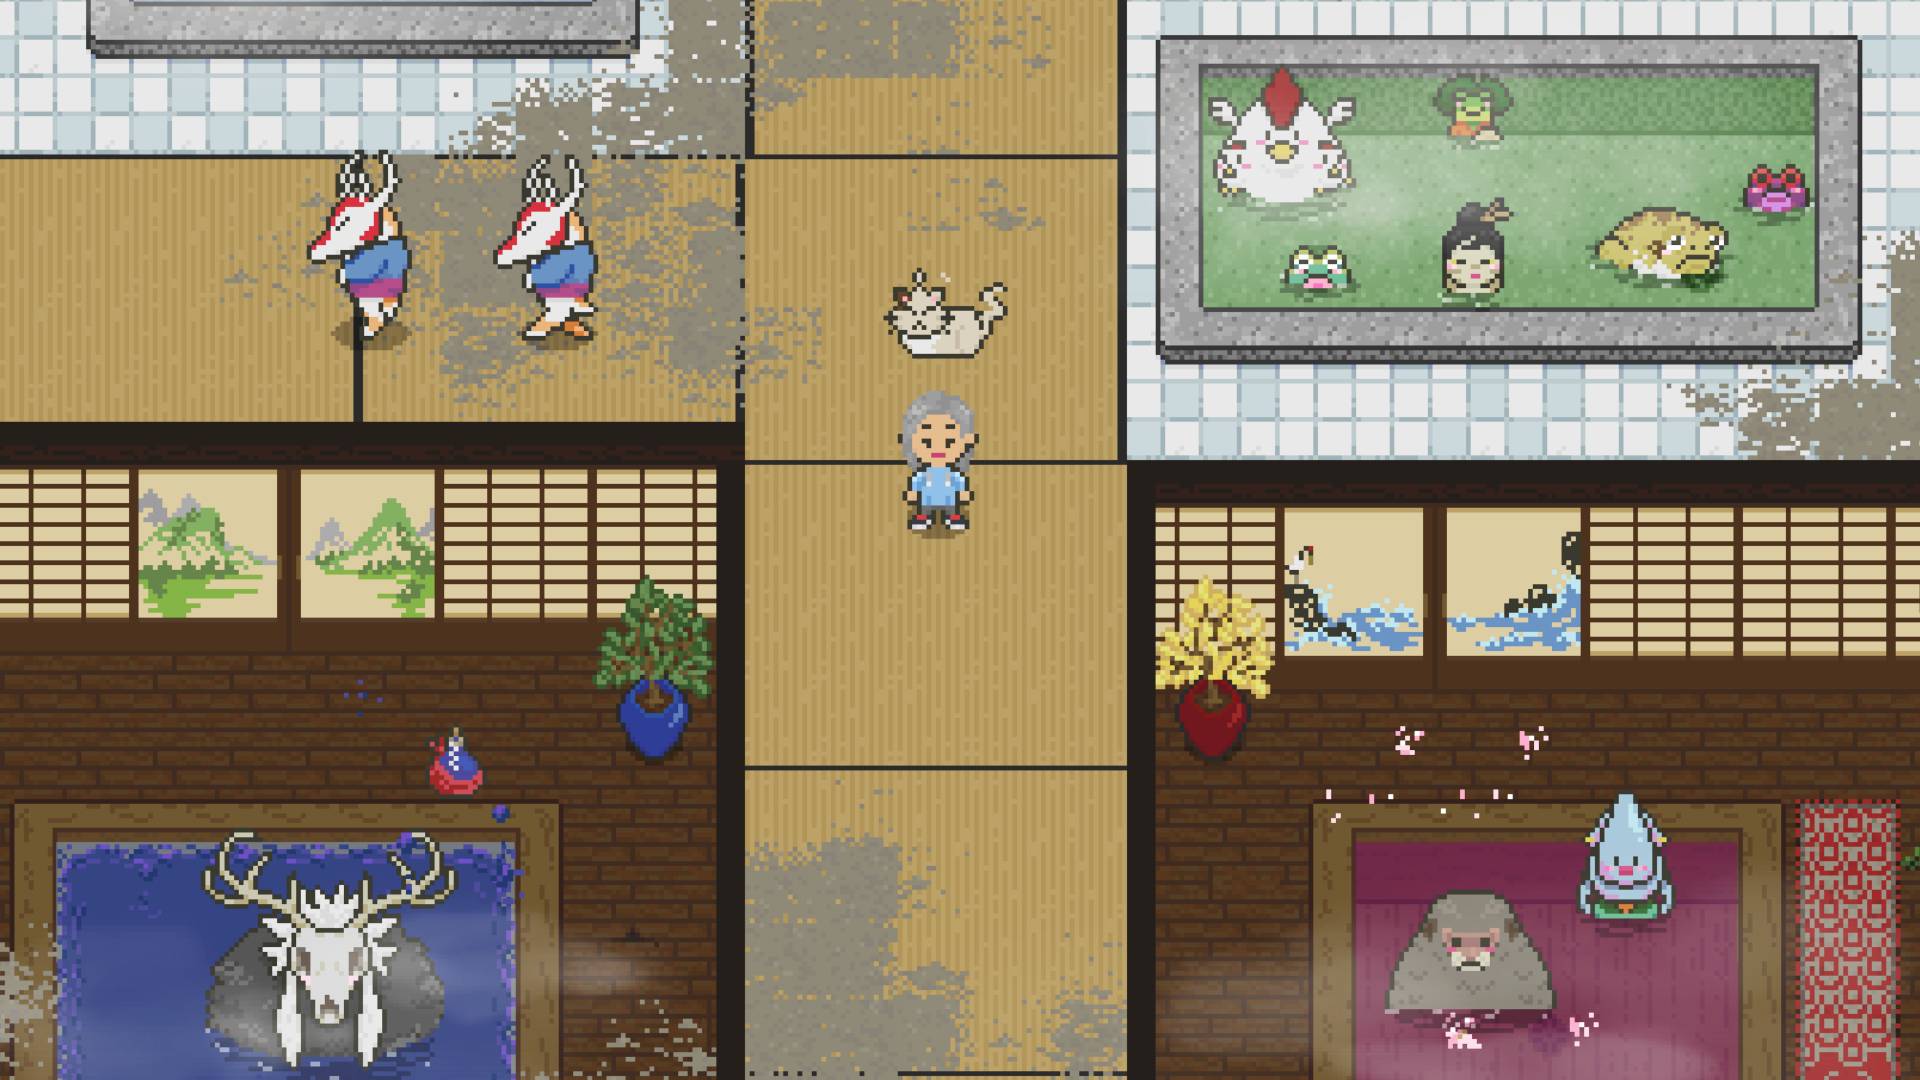 Spirittea brings wholesome life sim living to Switch later t